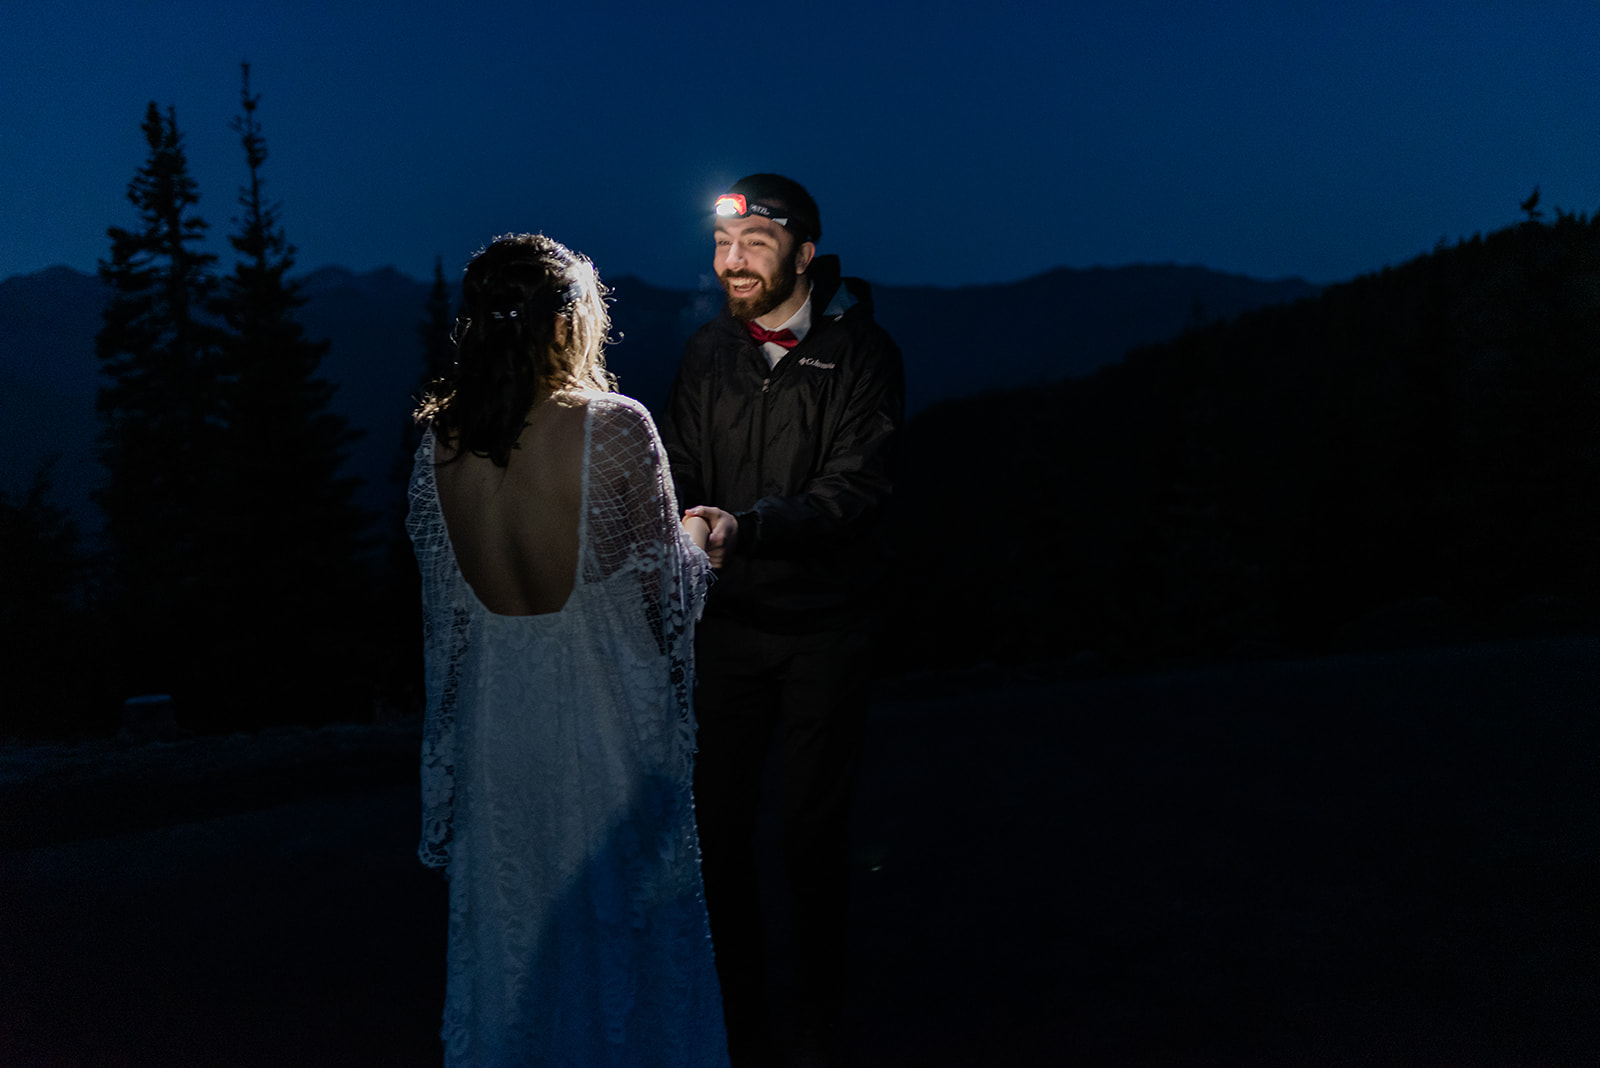 This is a couple on their wedding day before the sun has risen.